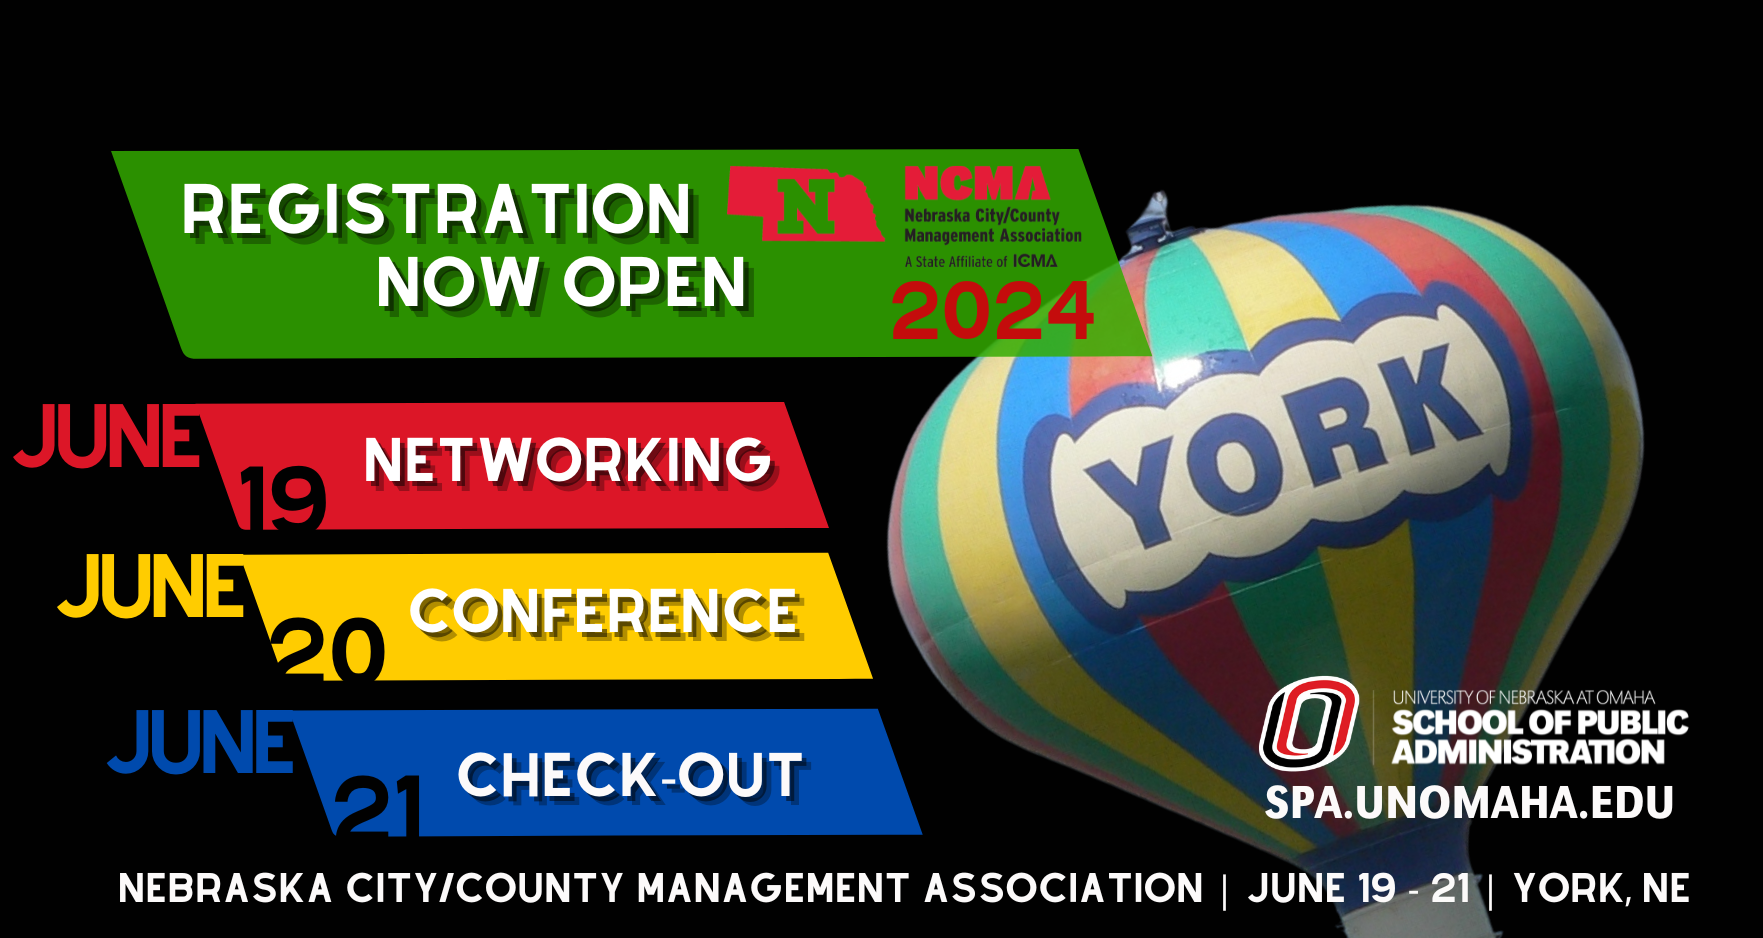 dates for ymca conference with York water tower